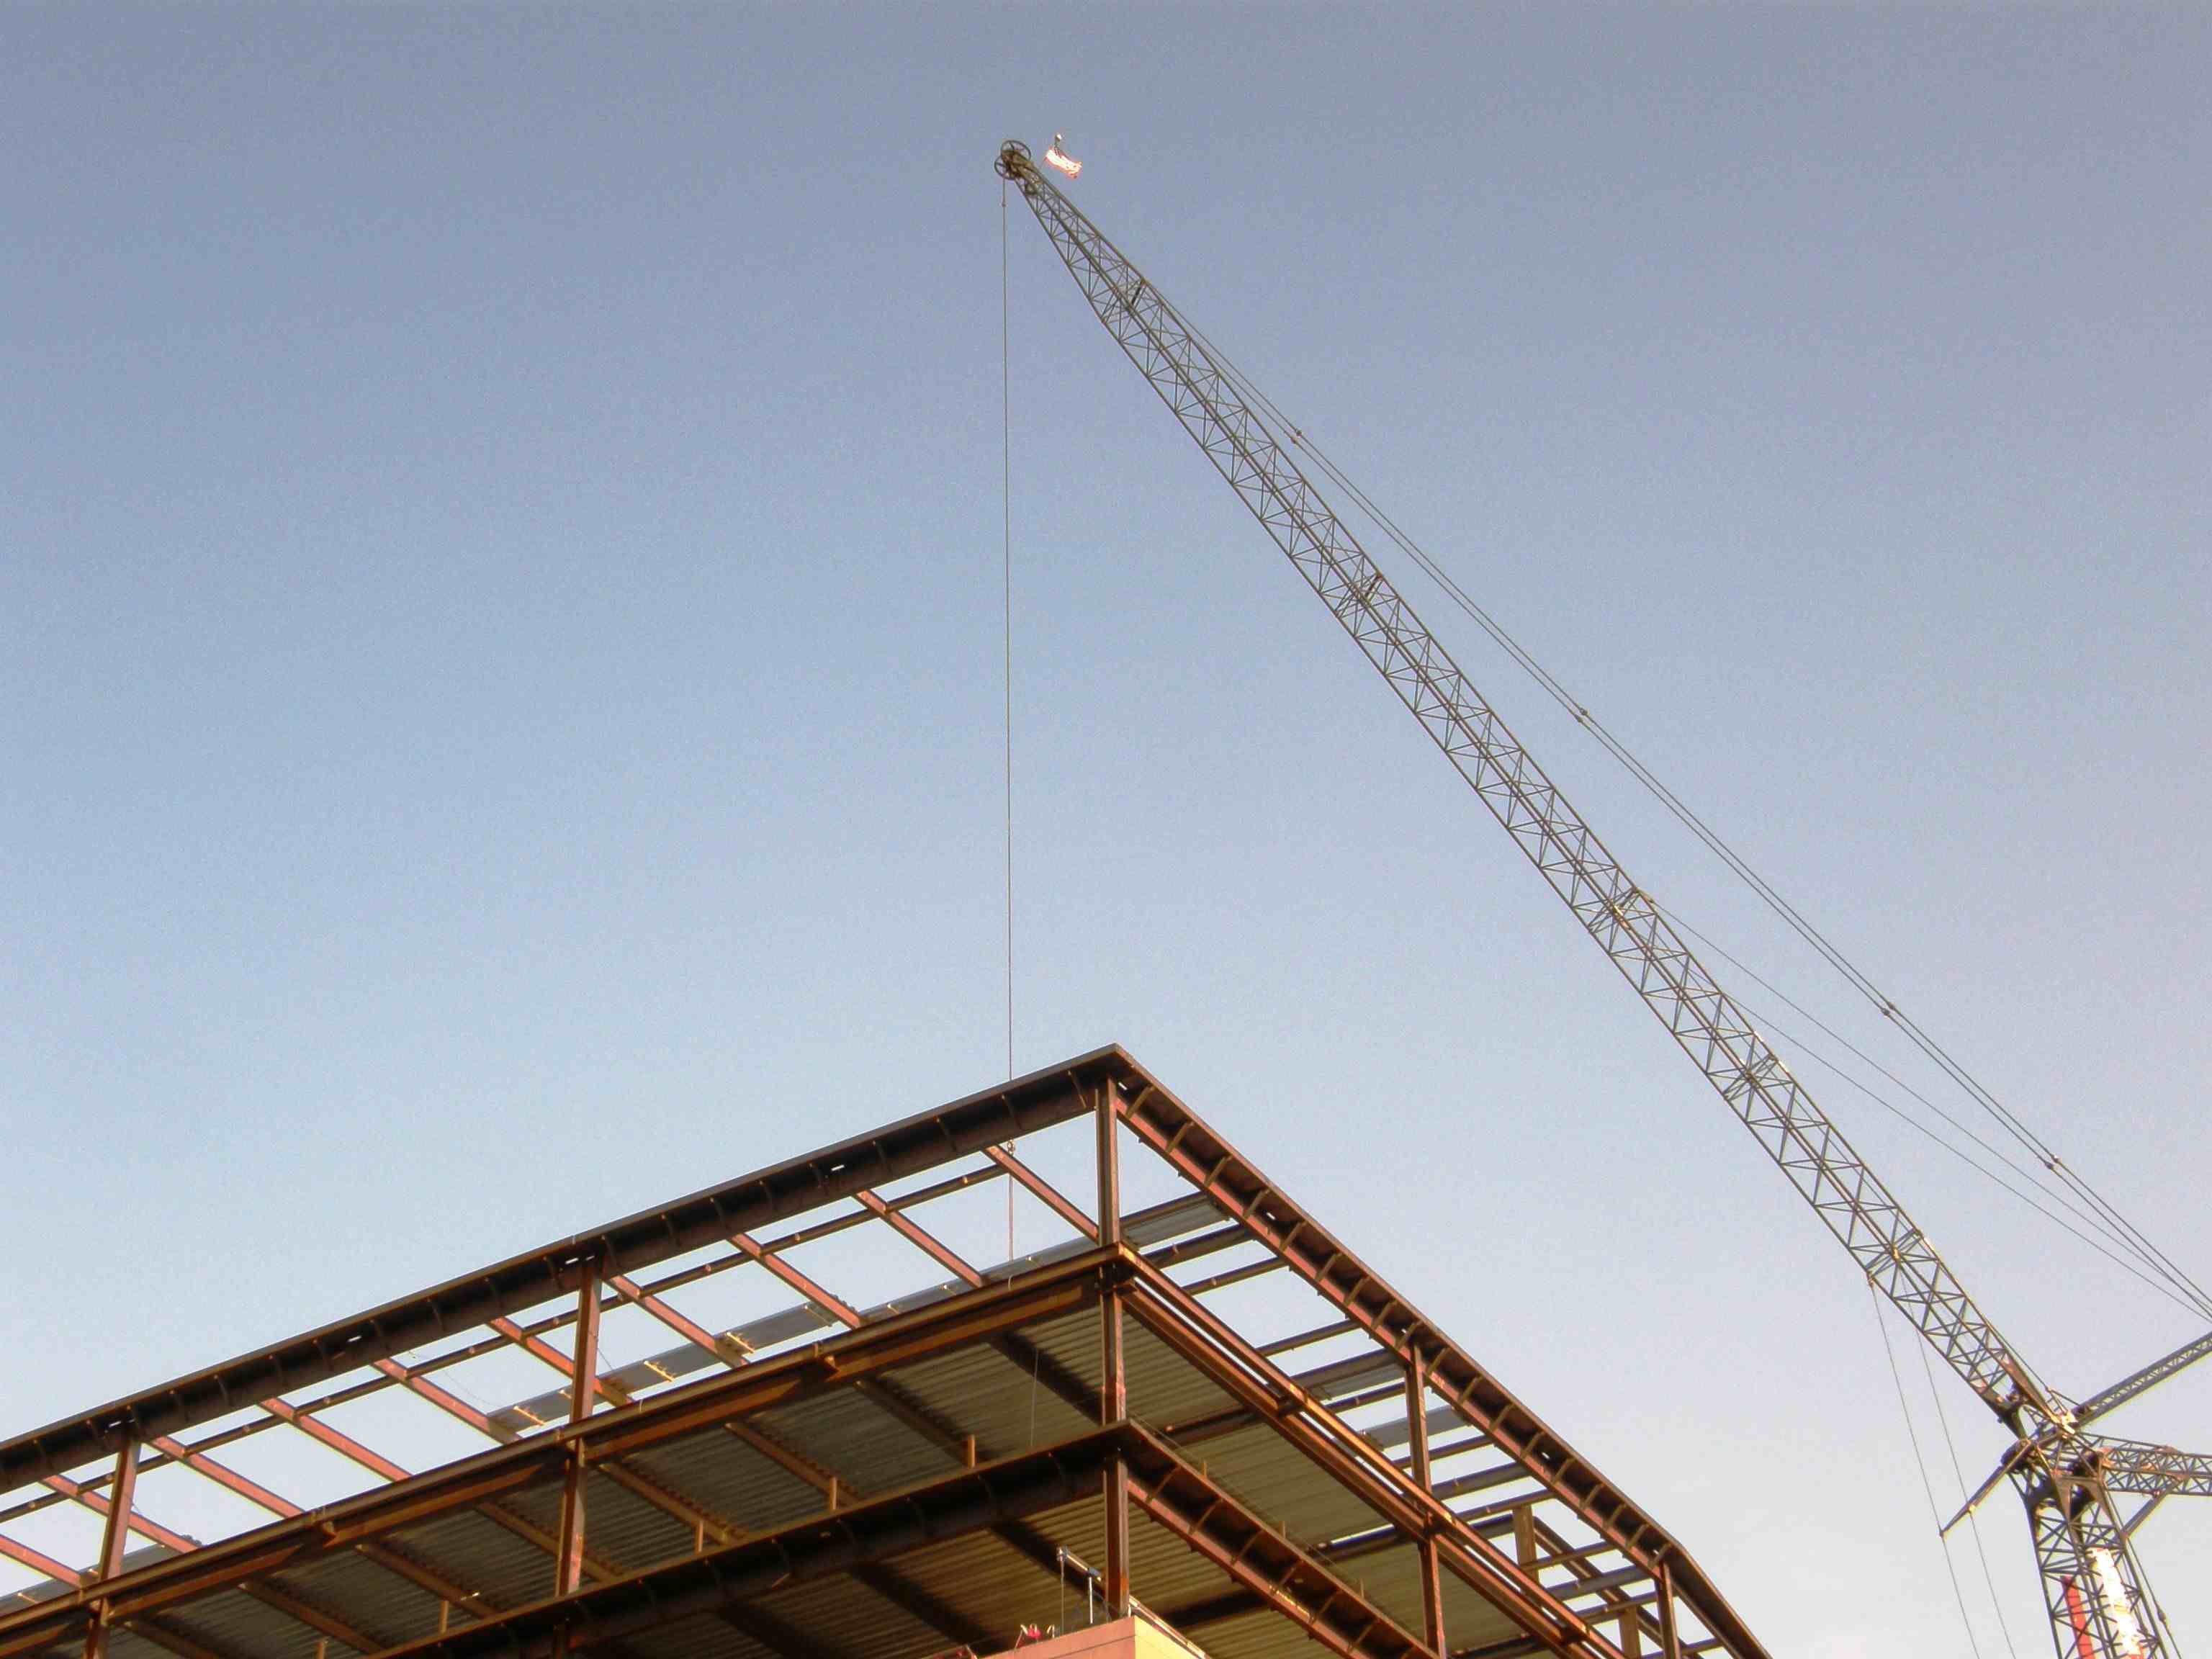 Cranes can be extremely dangerous and often lethal if and when the crane collapses.